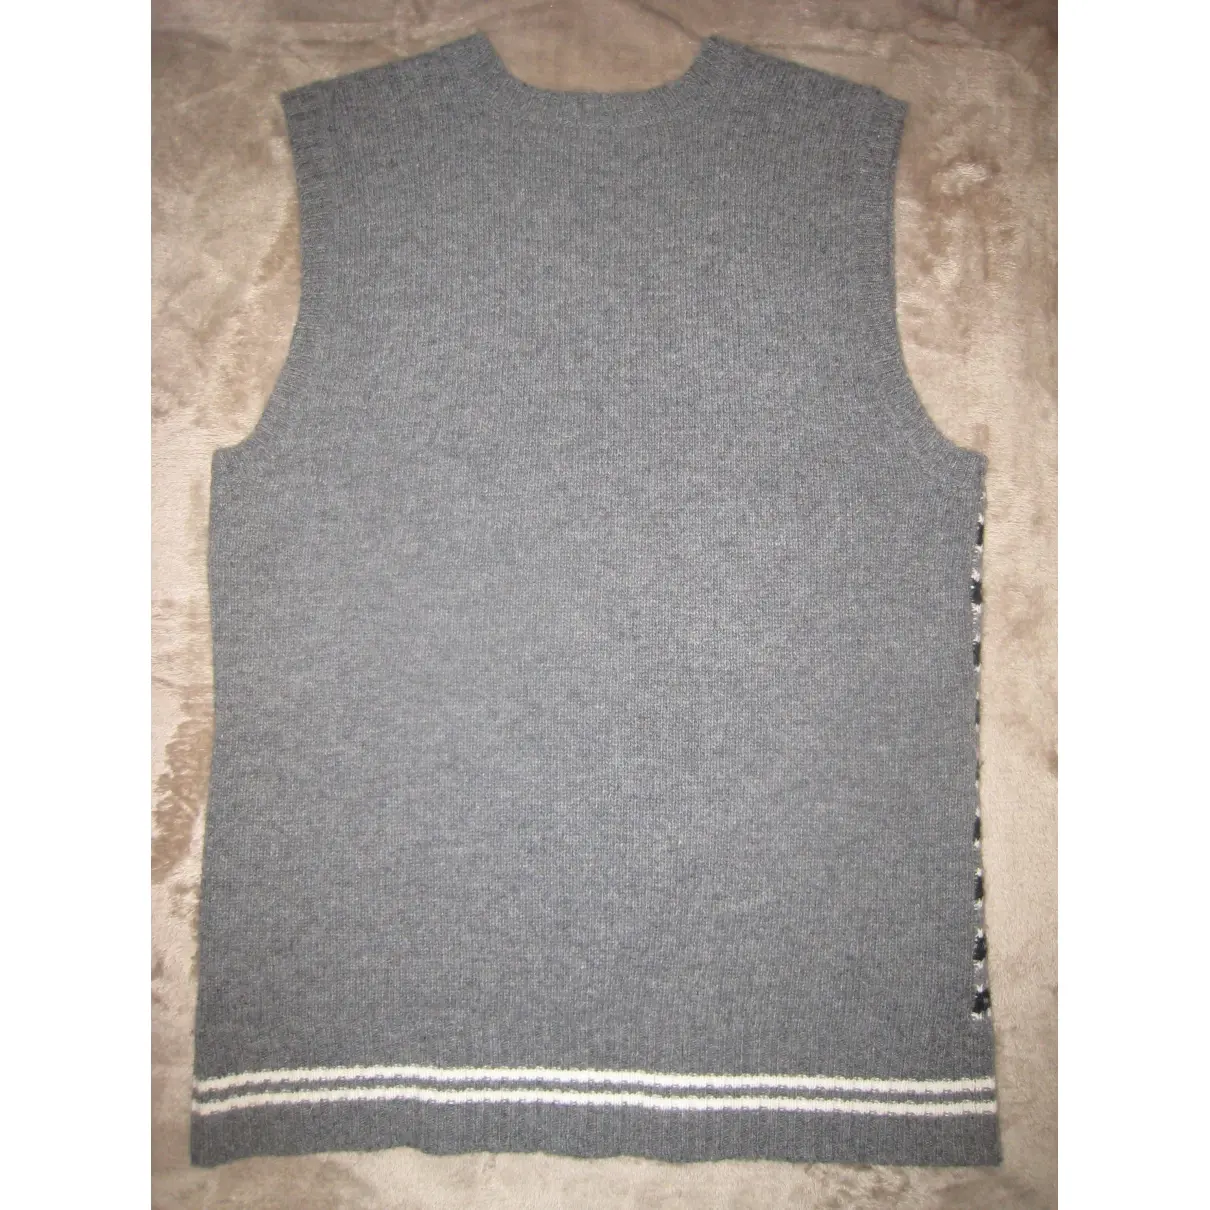 Pablo SLEEVELESS SWEATER for sale